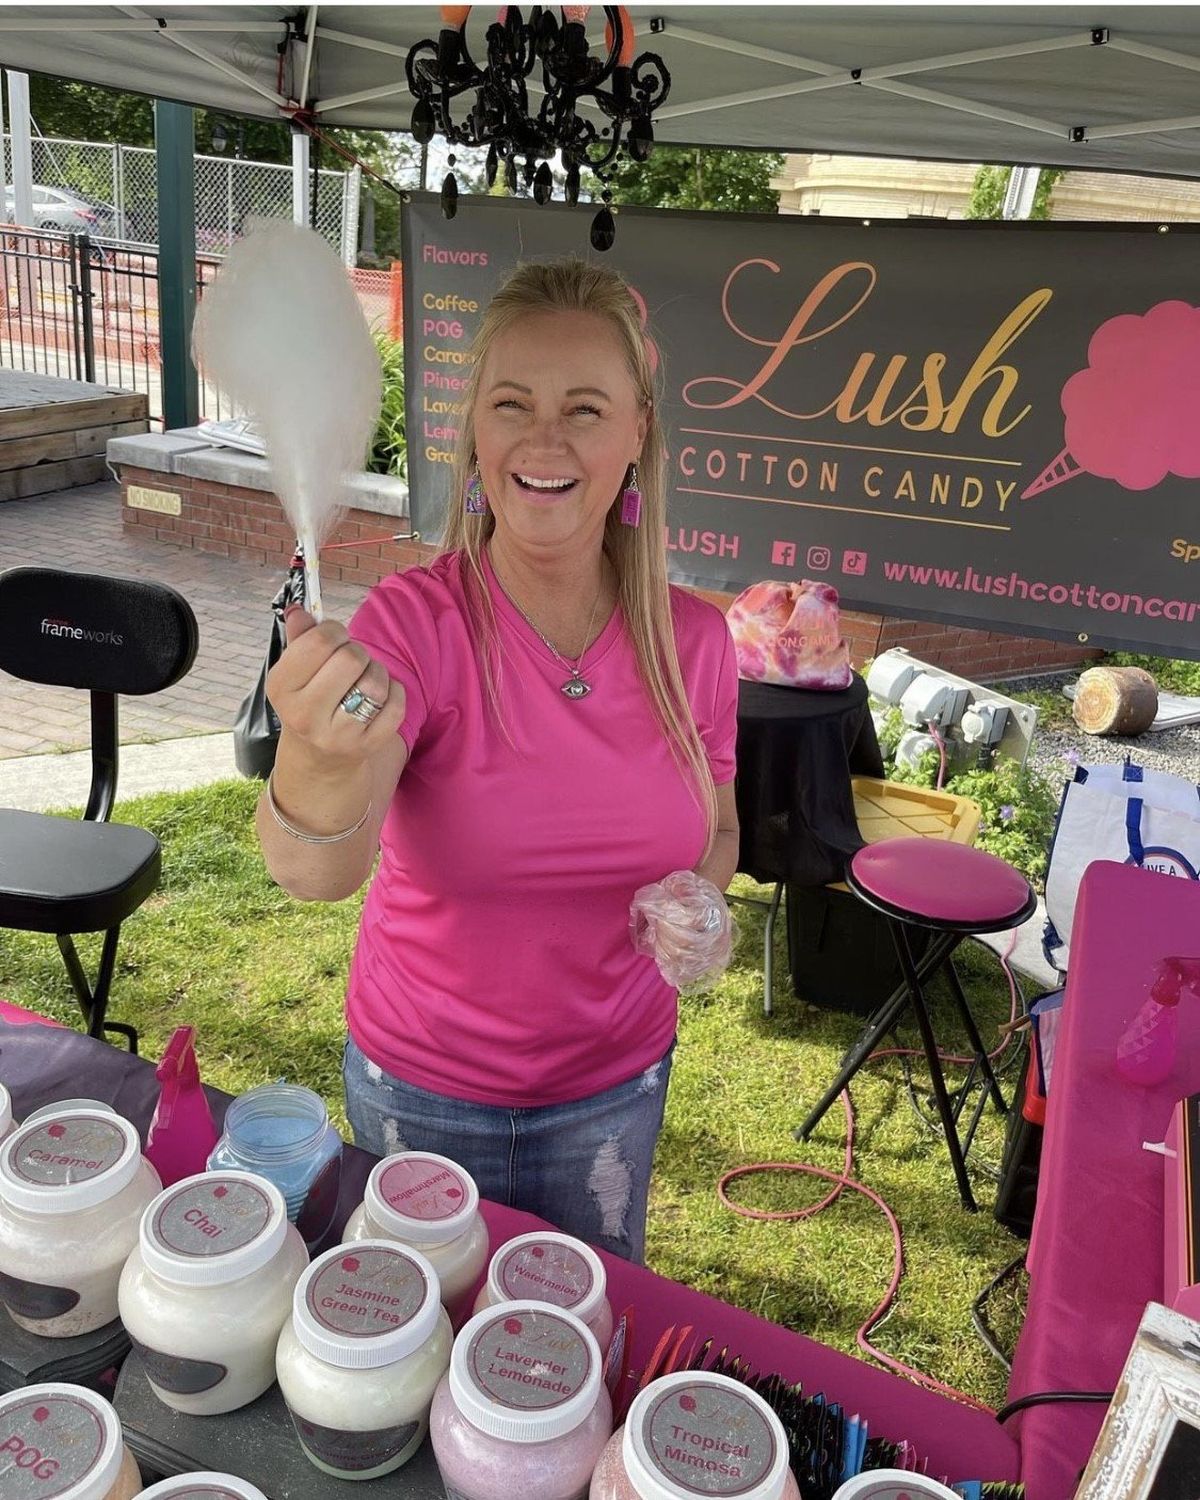 Lush Cotton Candy owner Valerie Richey displays a sample-sized portion of her product.  (Courtesy of Valerie Richey)